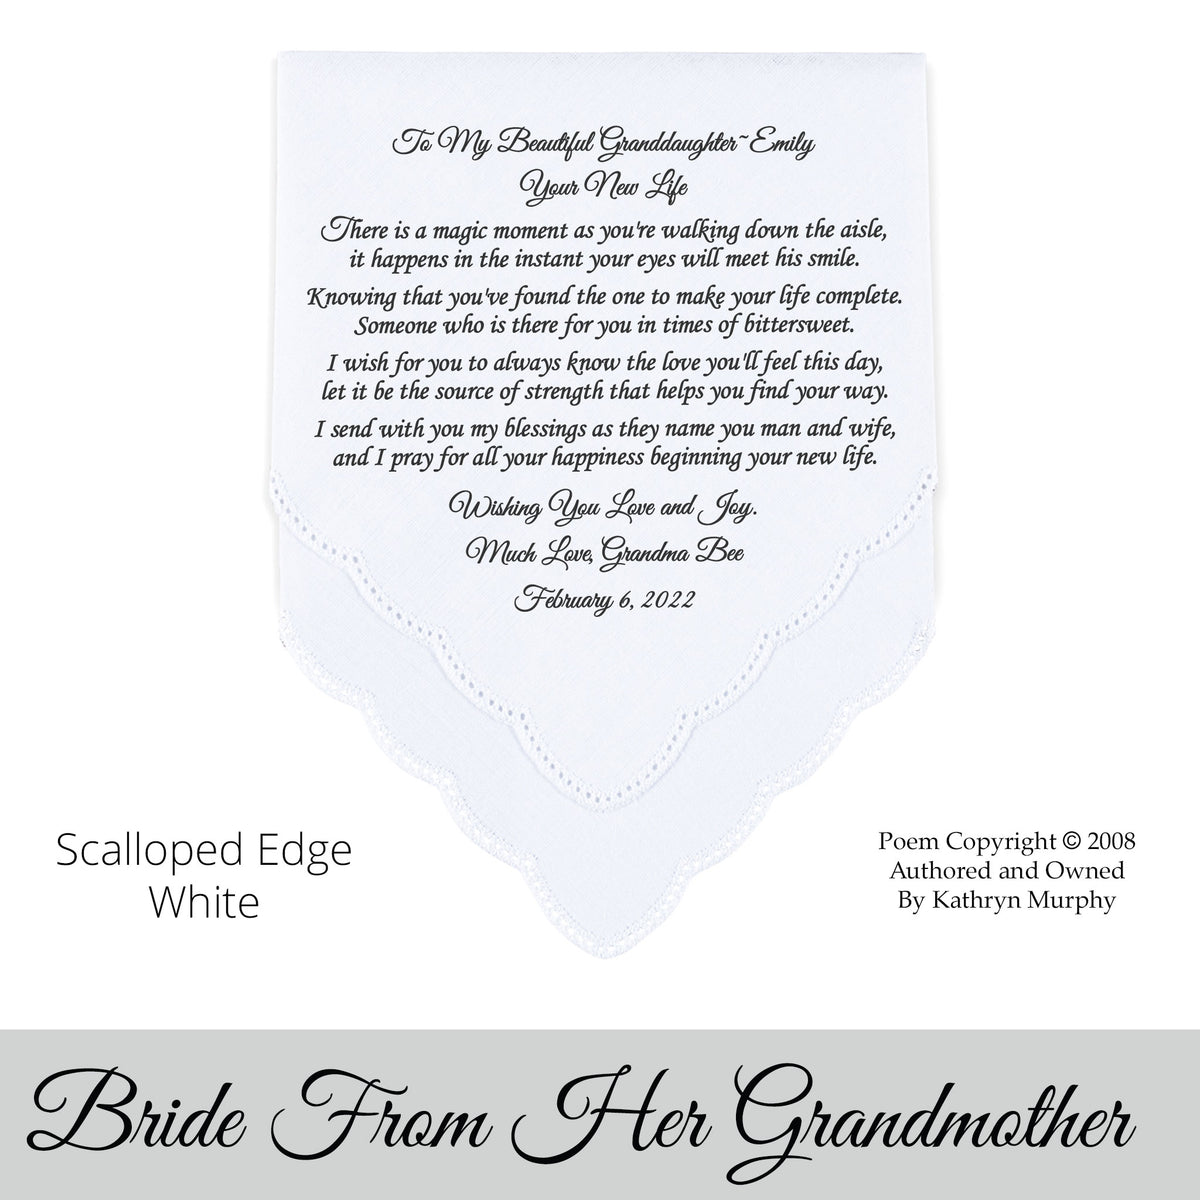 Gift for the Bride wedding hankie with the poem Your New Life